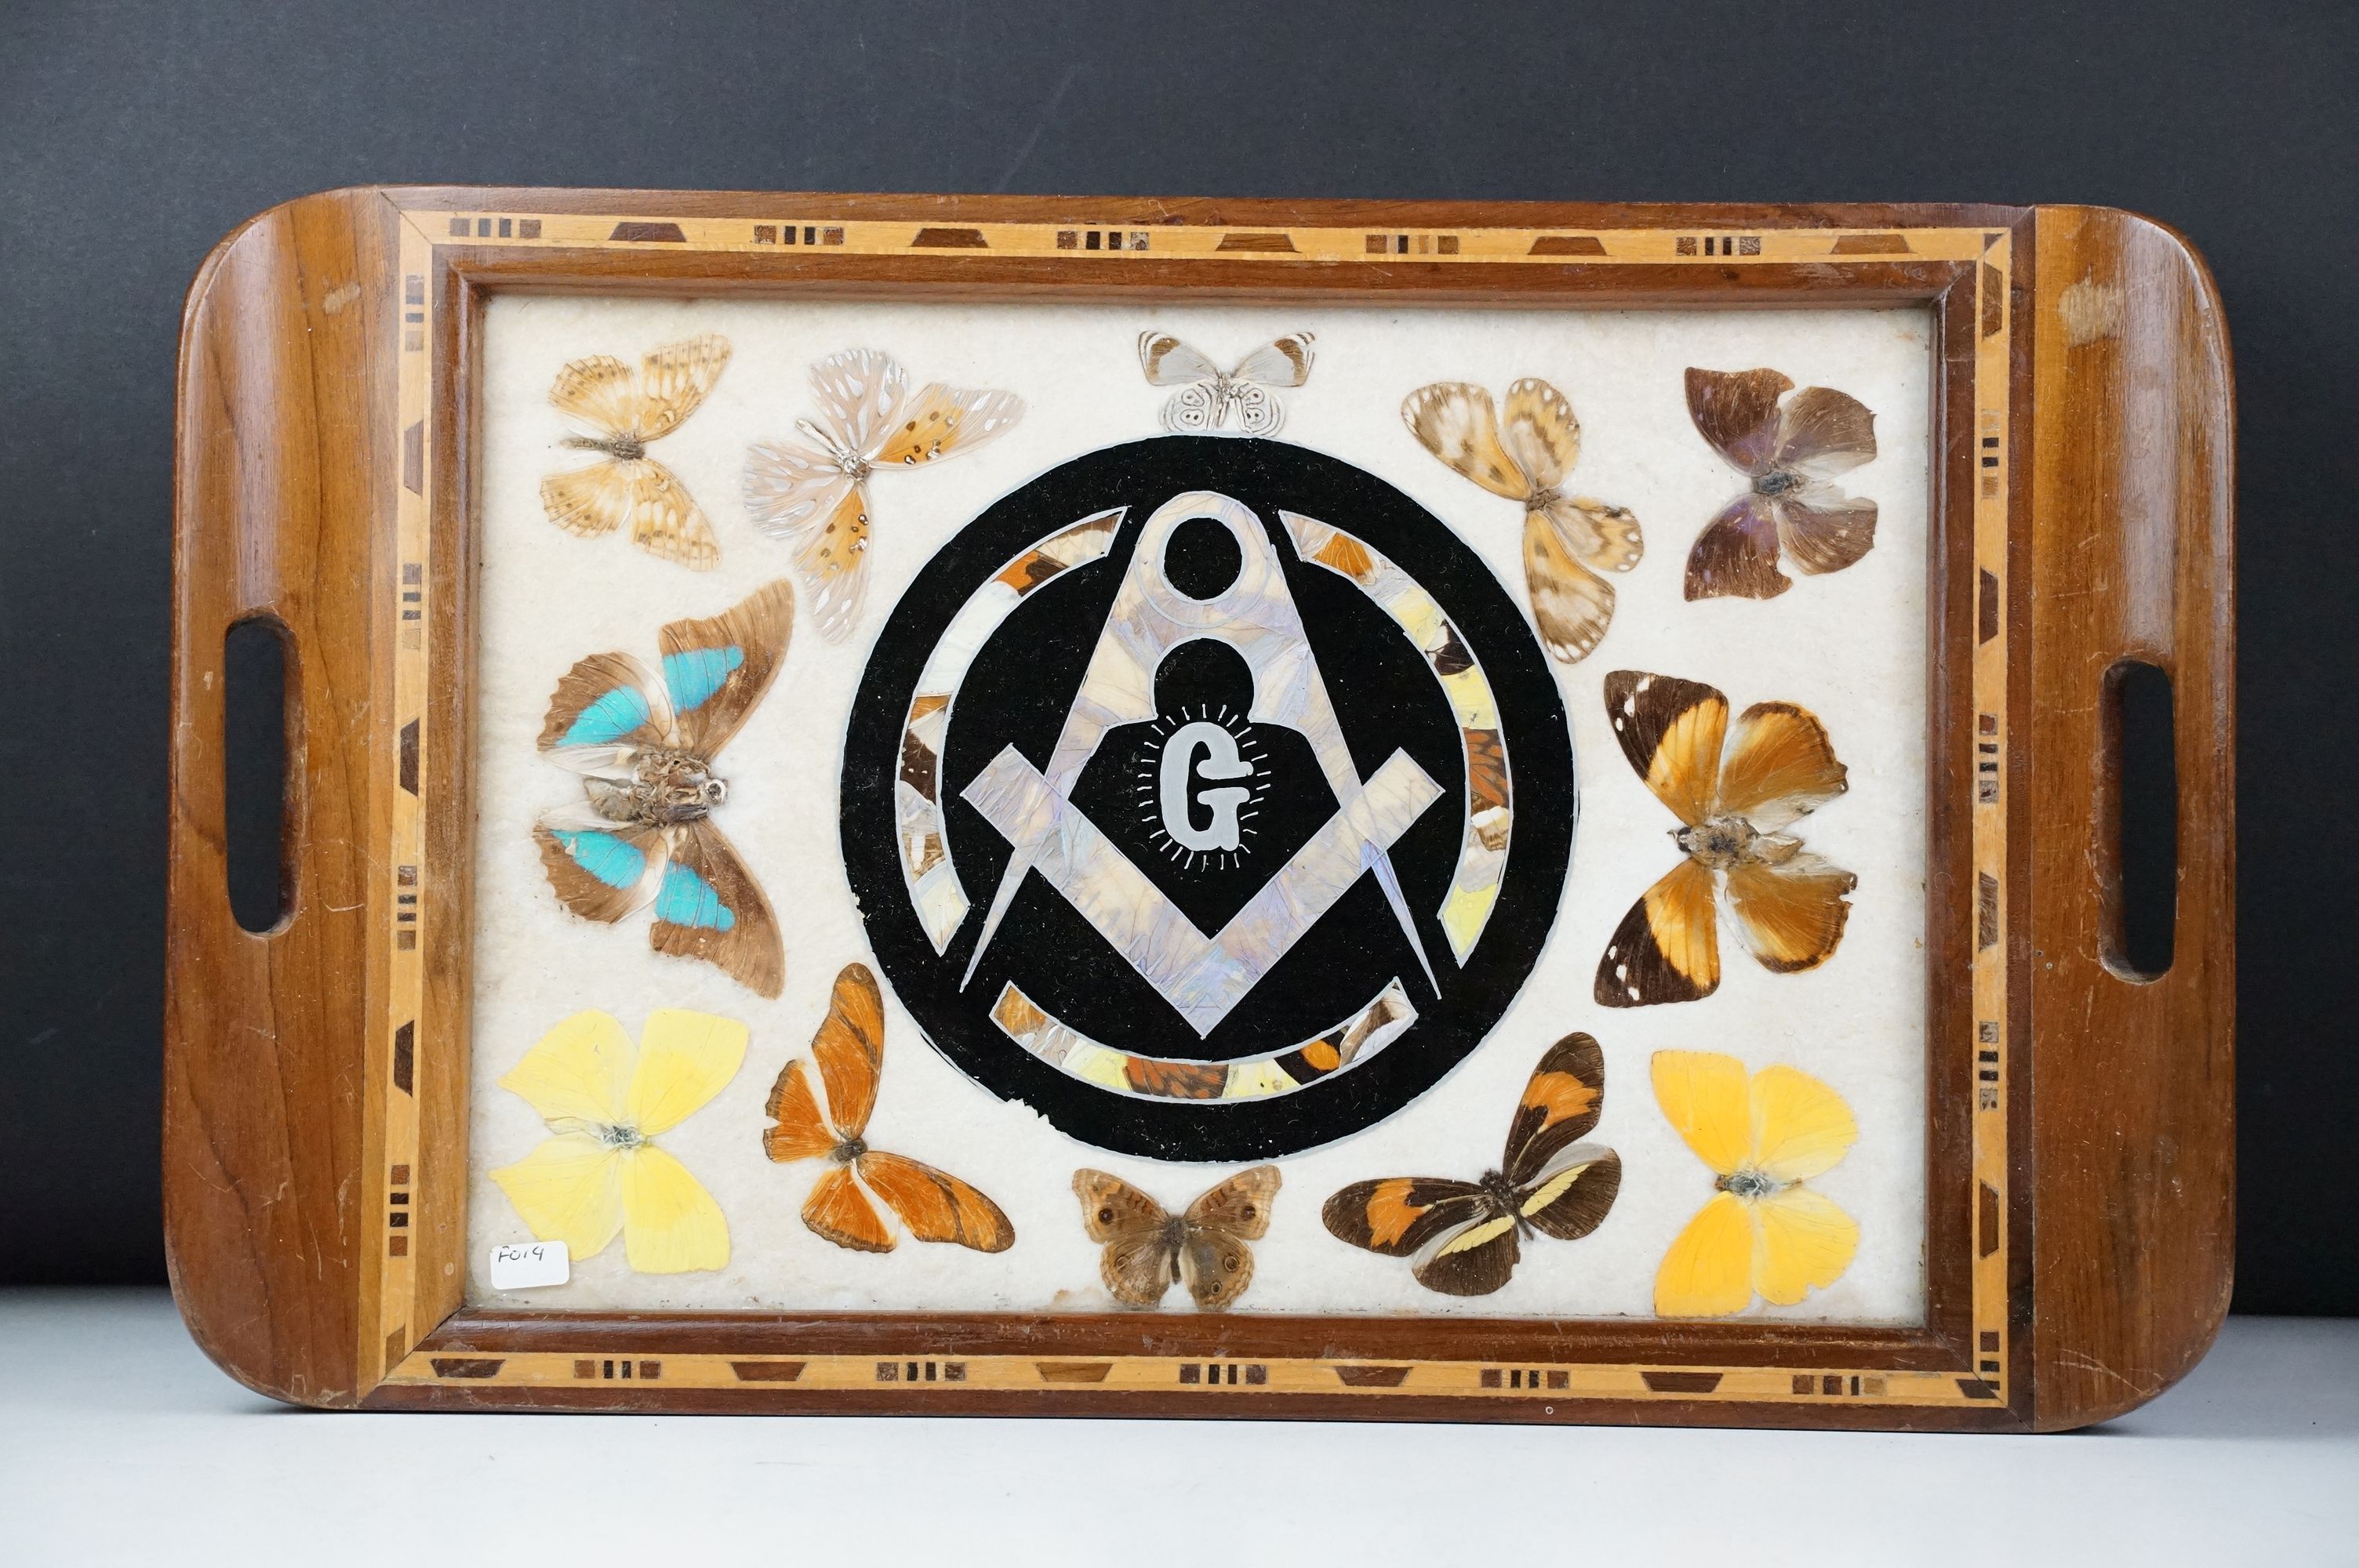 Early 20th century inlaid wooden tray with butterfly specimens and masonic butterfly wing emblem